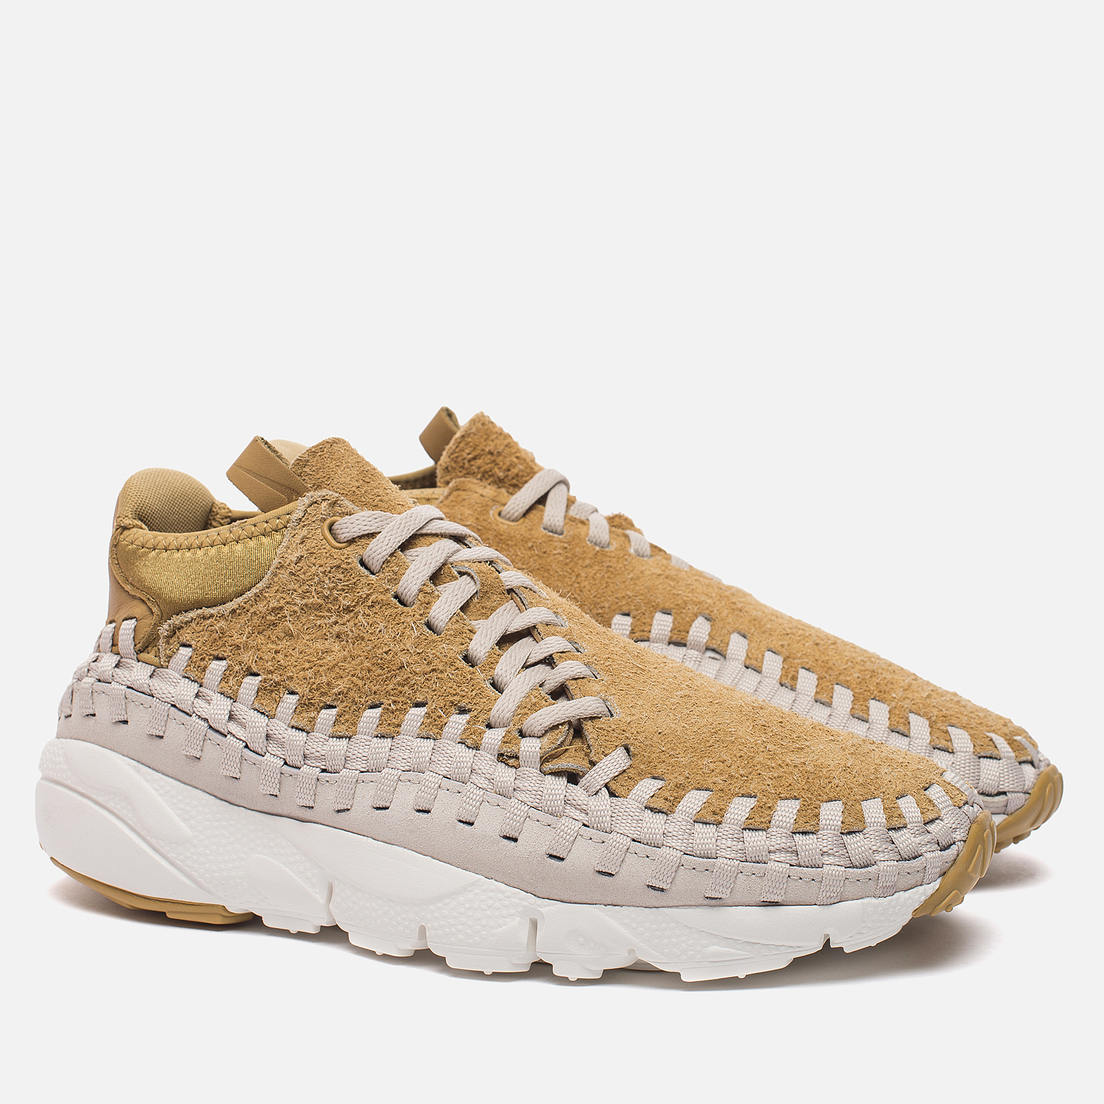 Nike Мужские кроссовки Air Footscape Woven Chukka QS Hairy Suede Pack